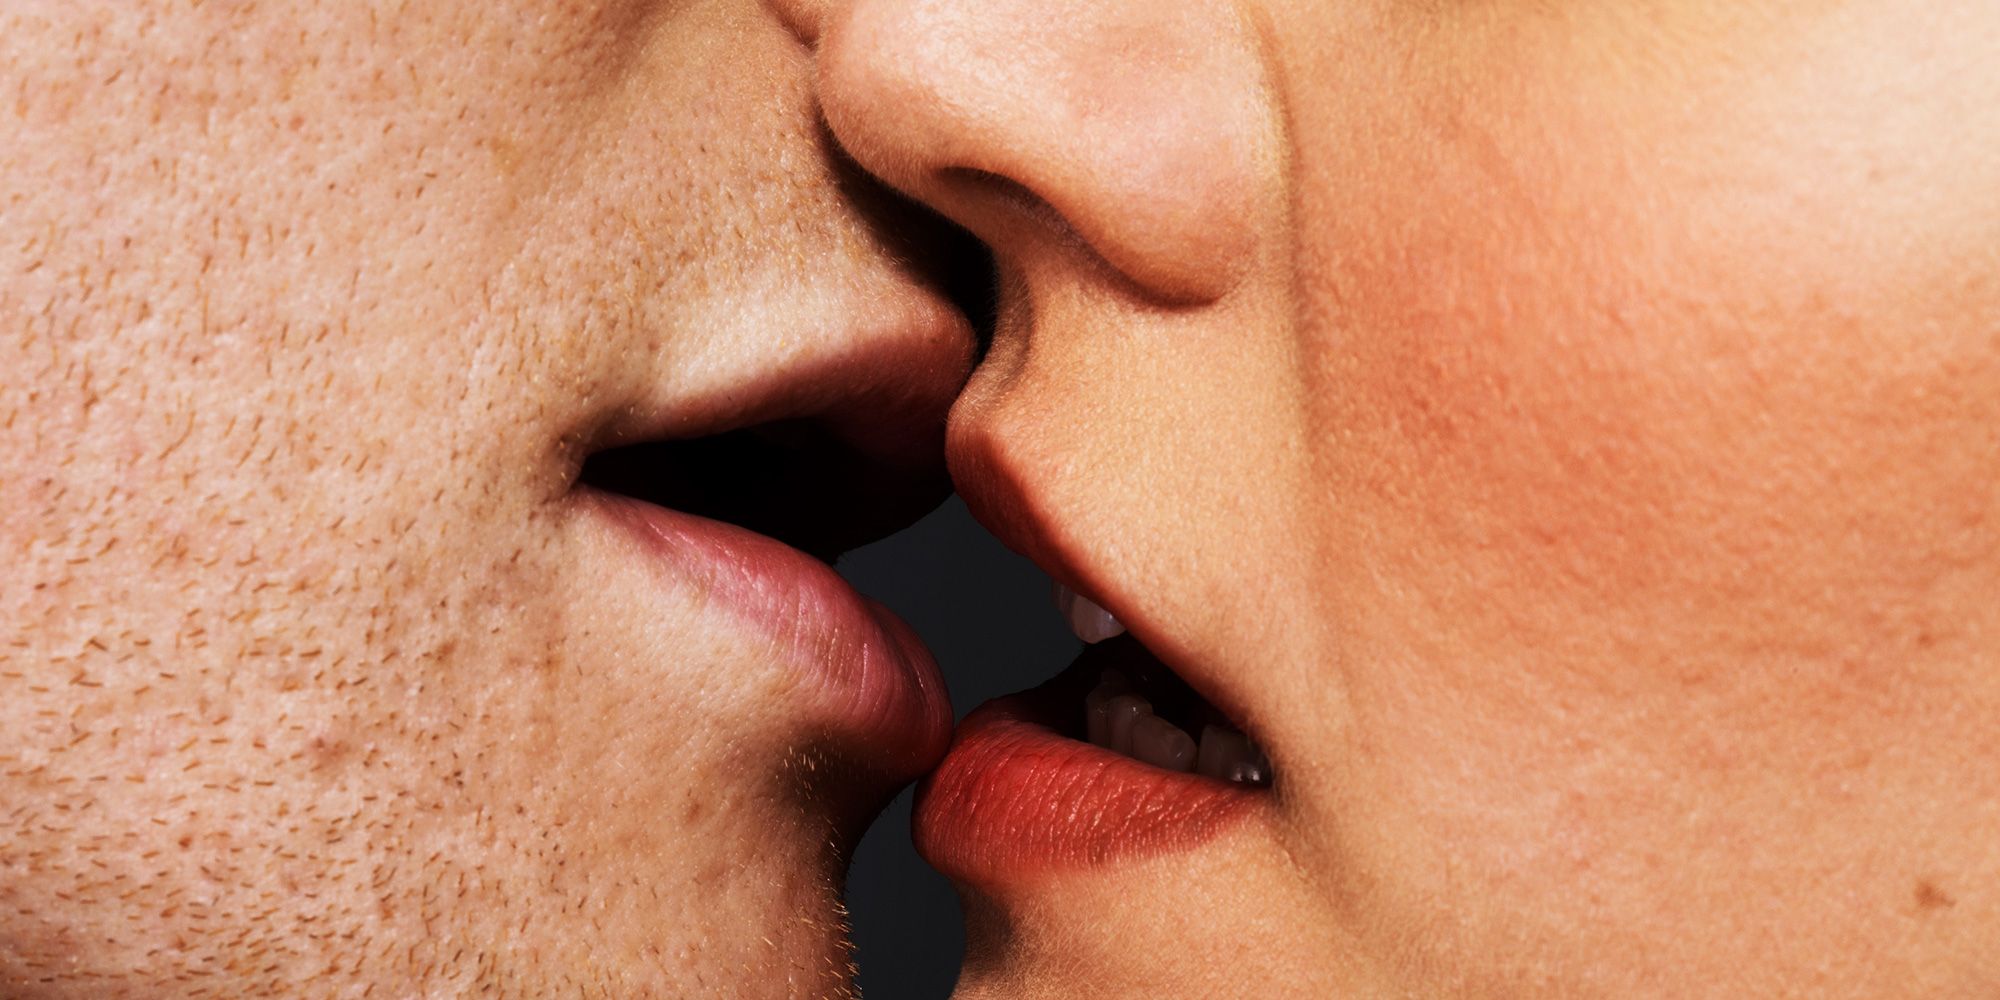 Can You Get An STD From Kissing? Possible Diseases From Kissing